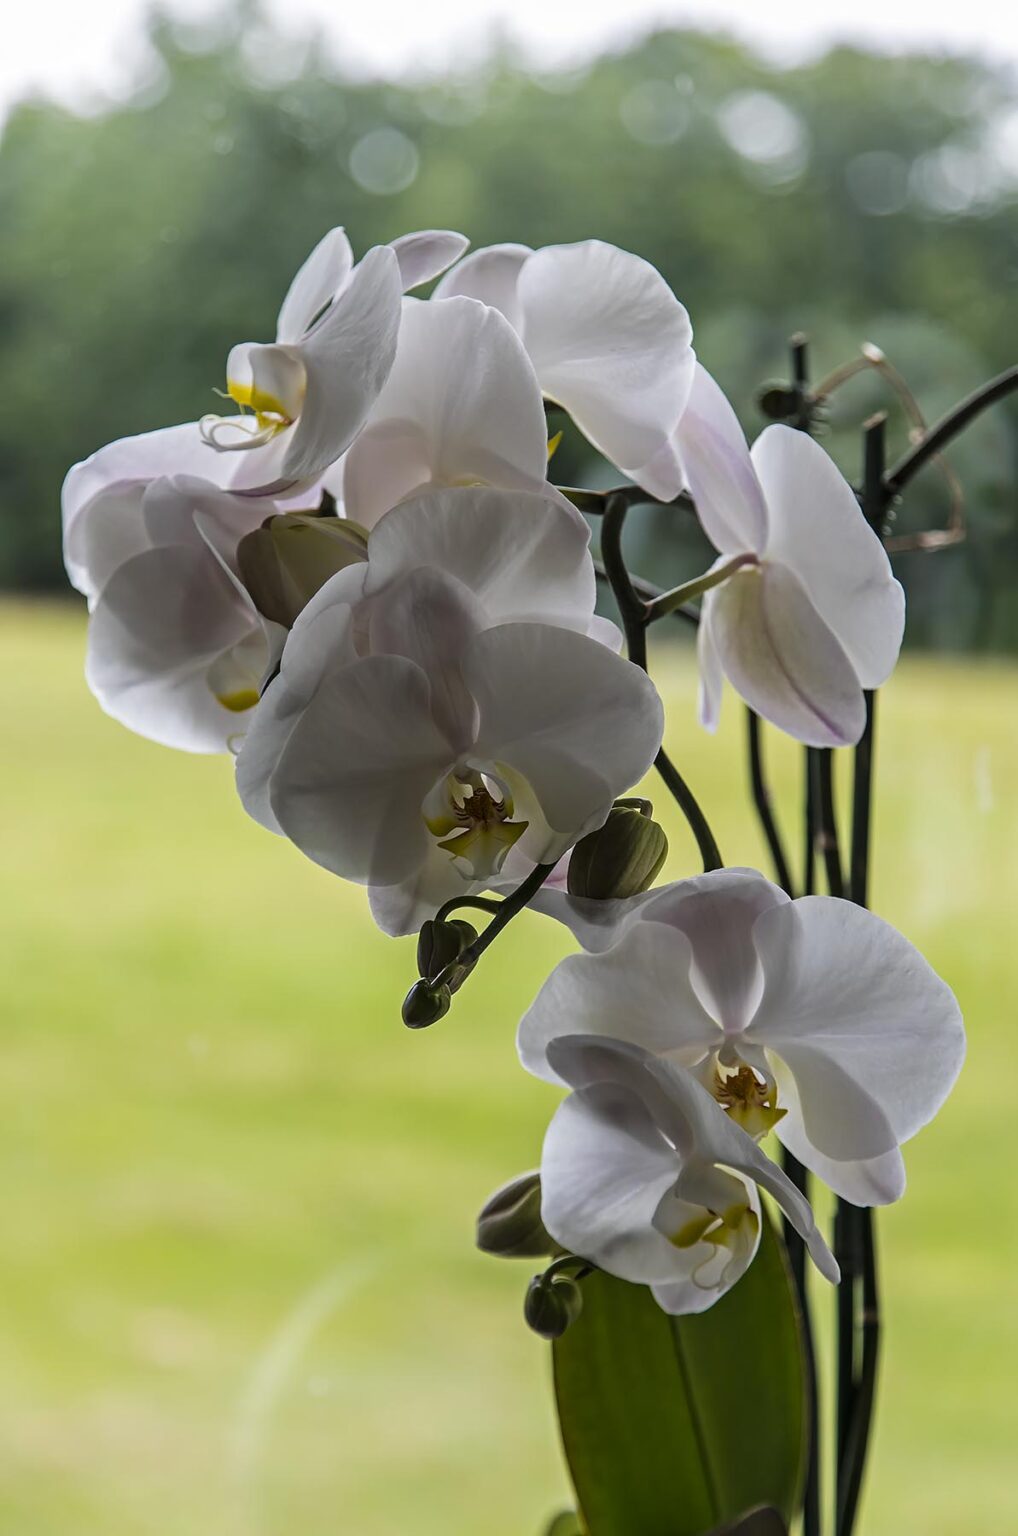 A white PHALAENOPSIS ORCHID in full bloom